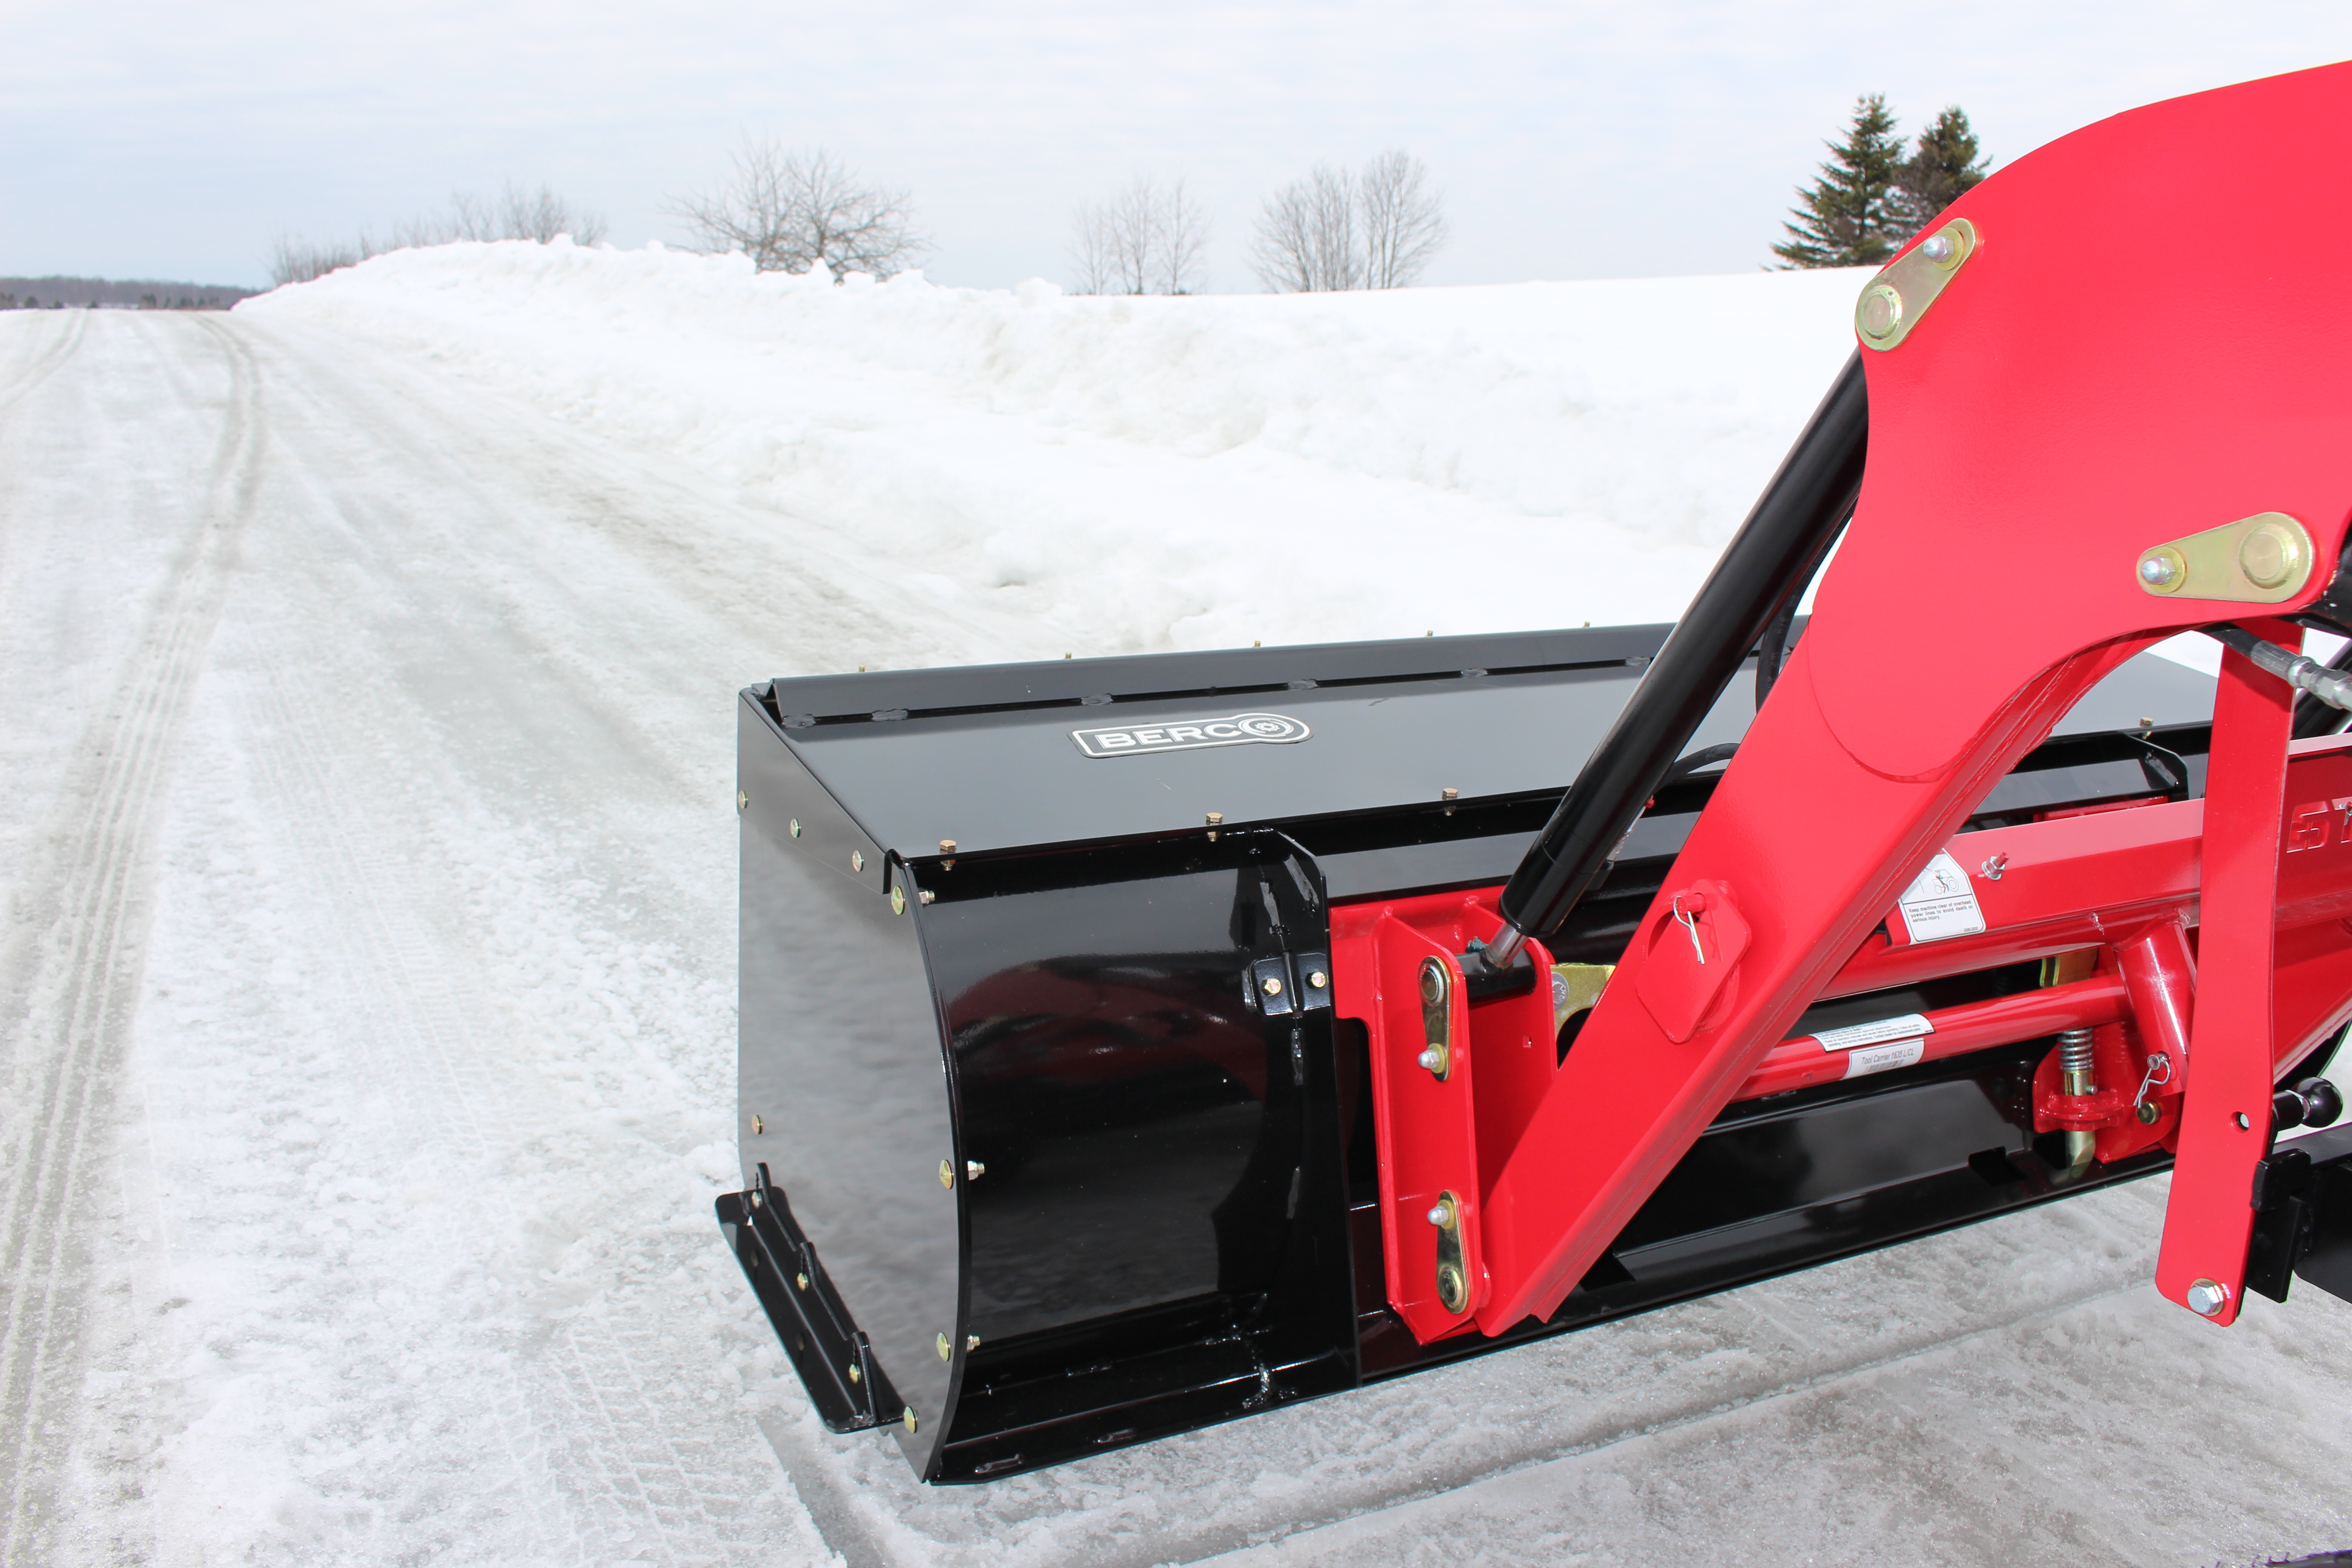 Light Duty Snow Push for tractors equipped with "Skid Steer" style attach